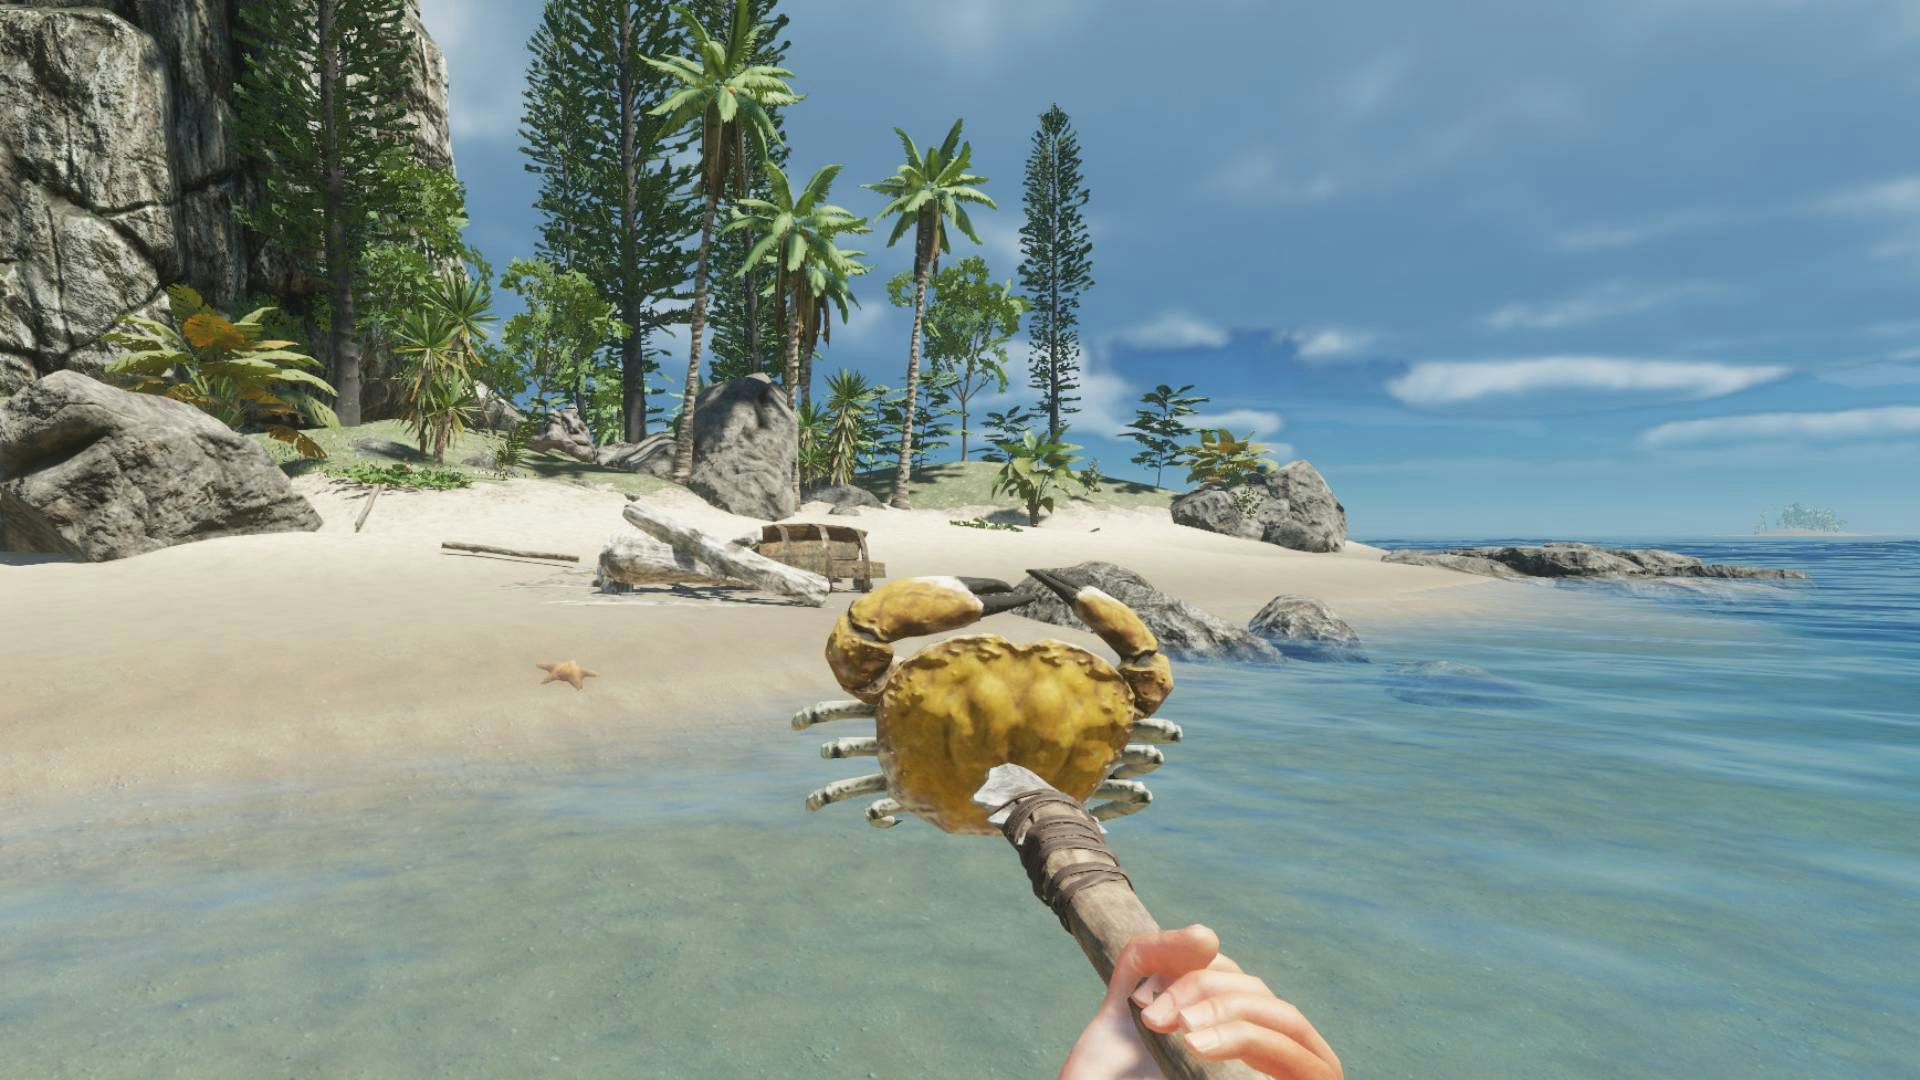 Share the five games you would take to a desert island and why for $7